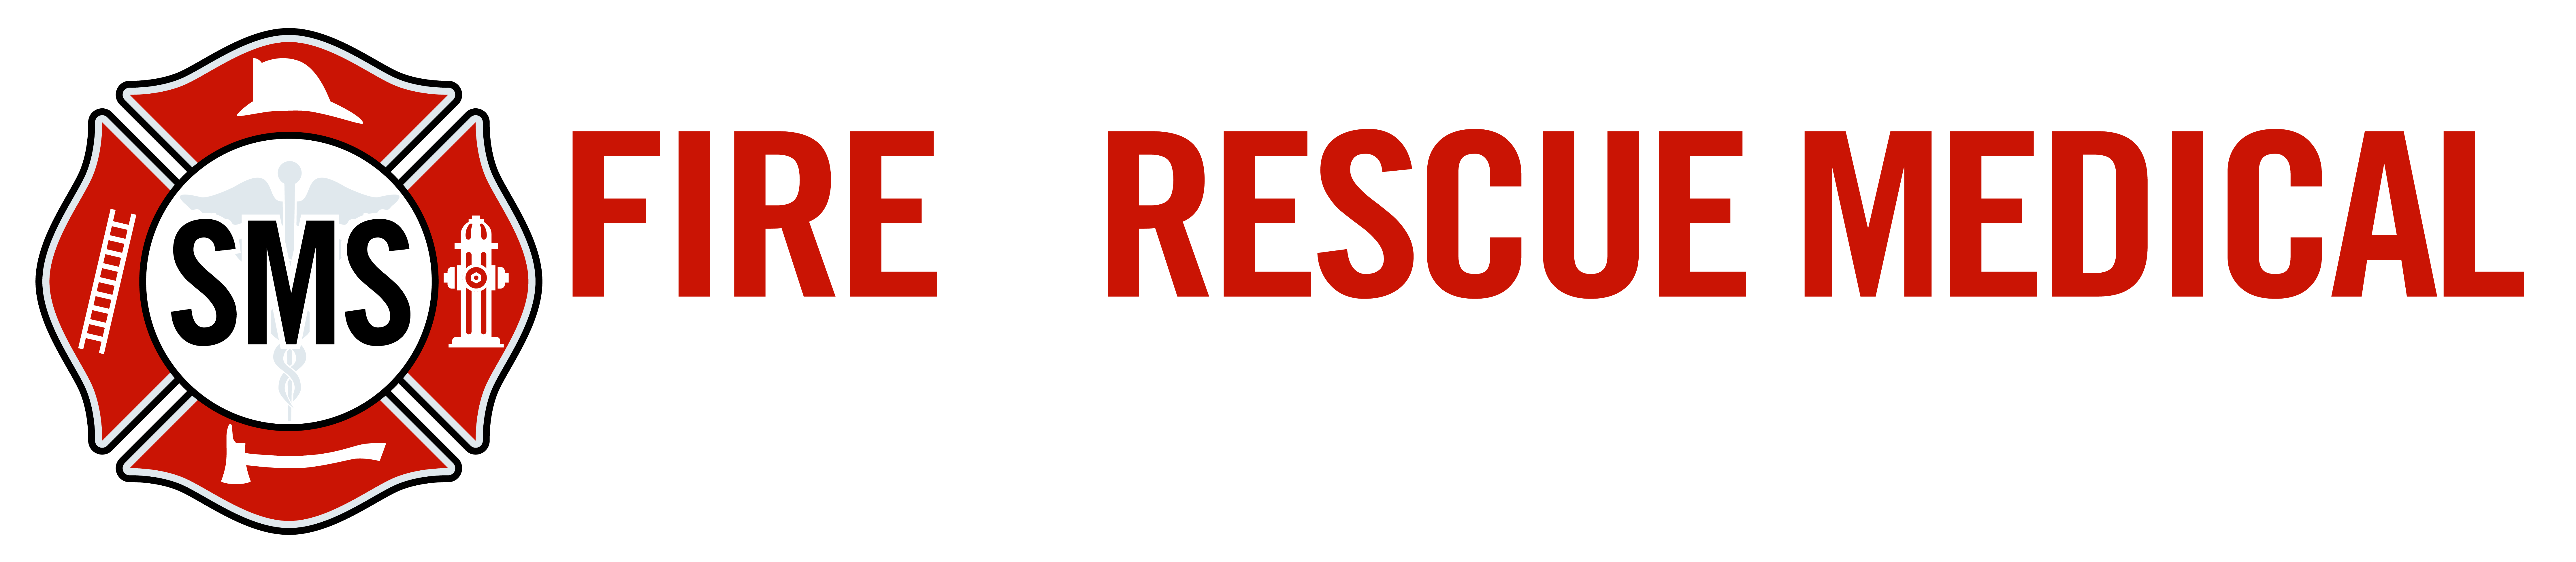 Fire Rescue Medical Sound Medical Systems